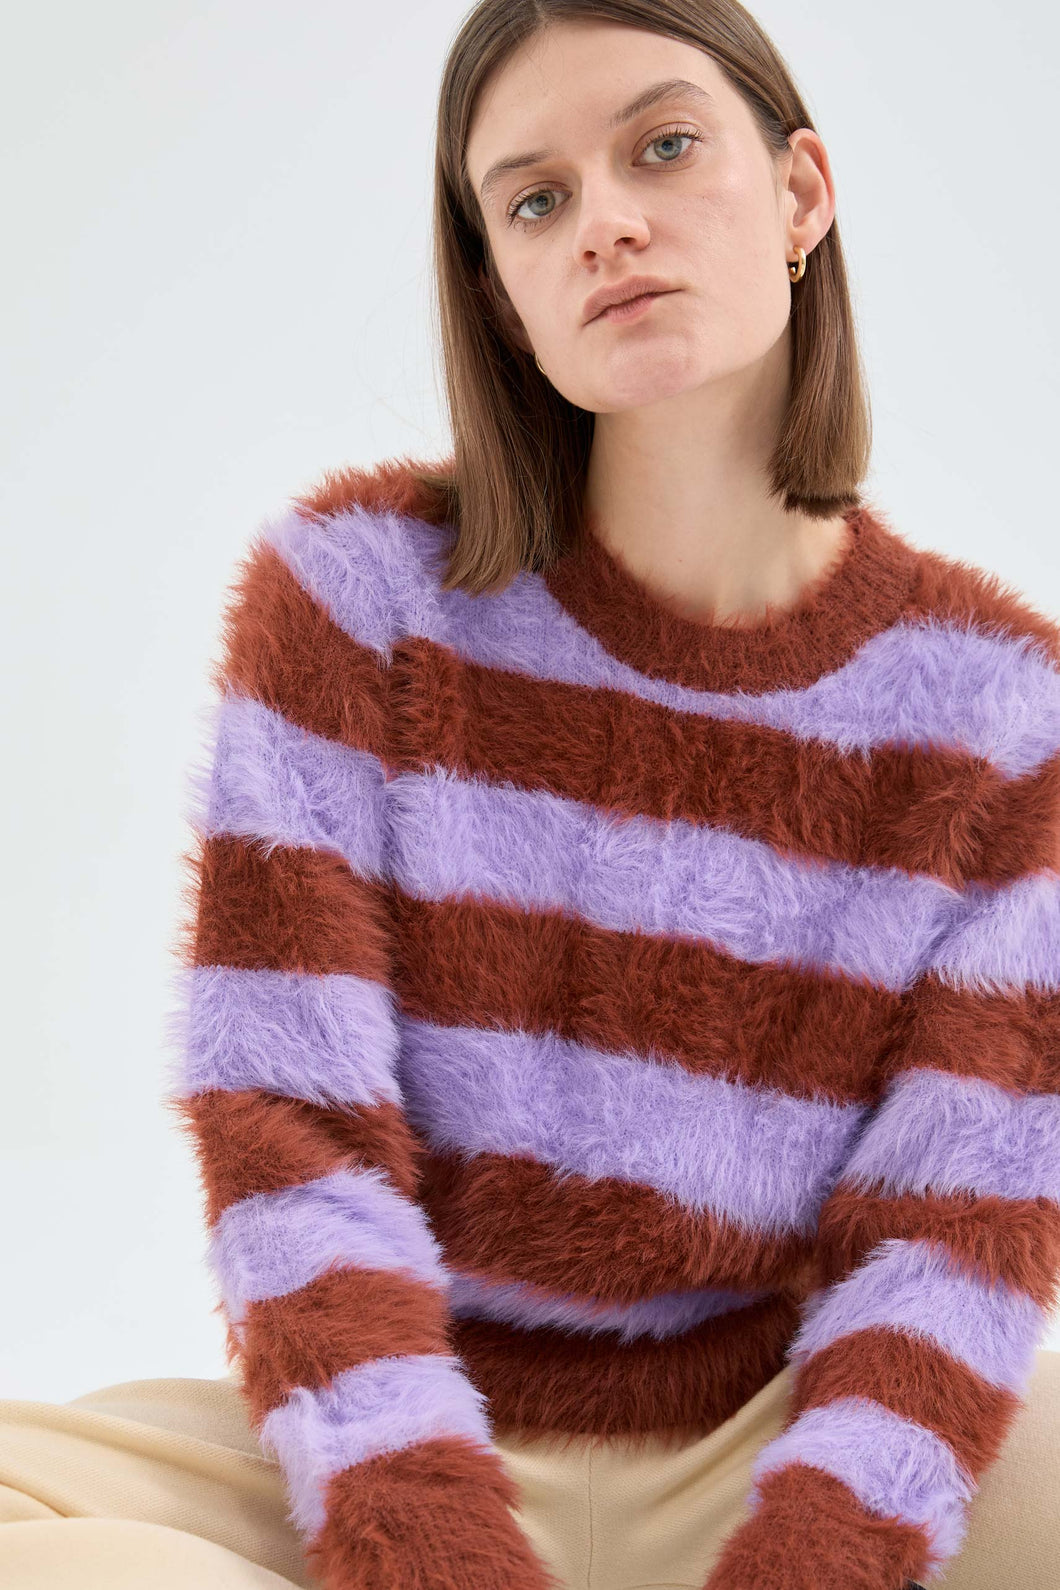 Compania Fantastica Lilac and Brown Textured Knit Jumper